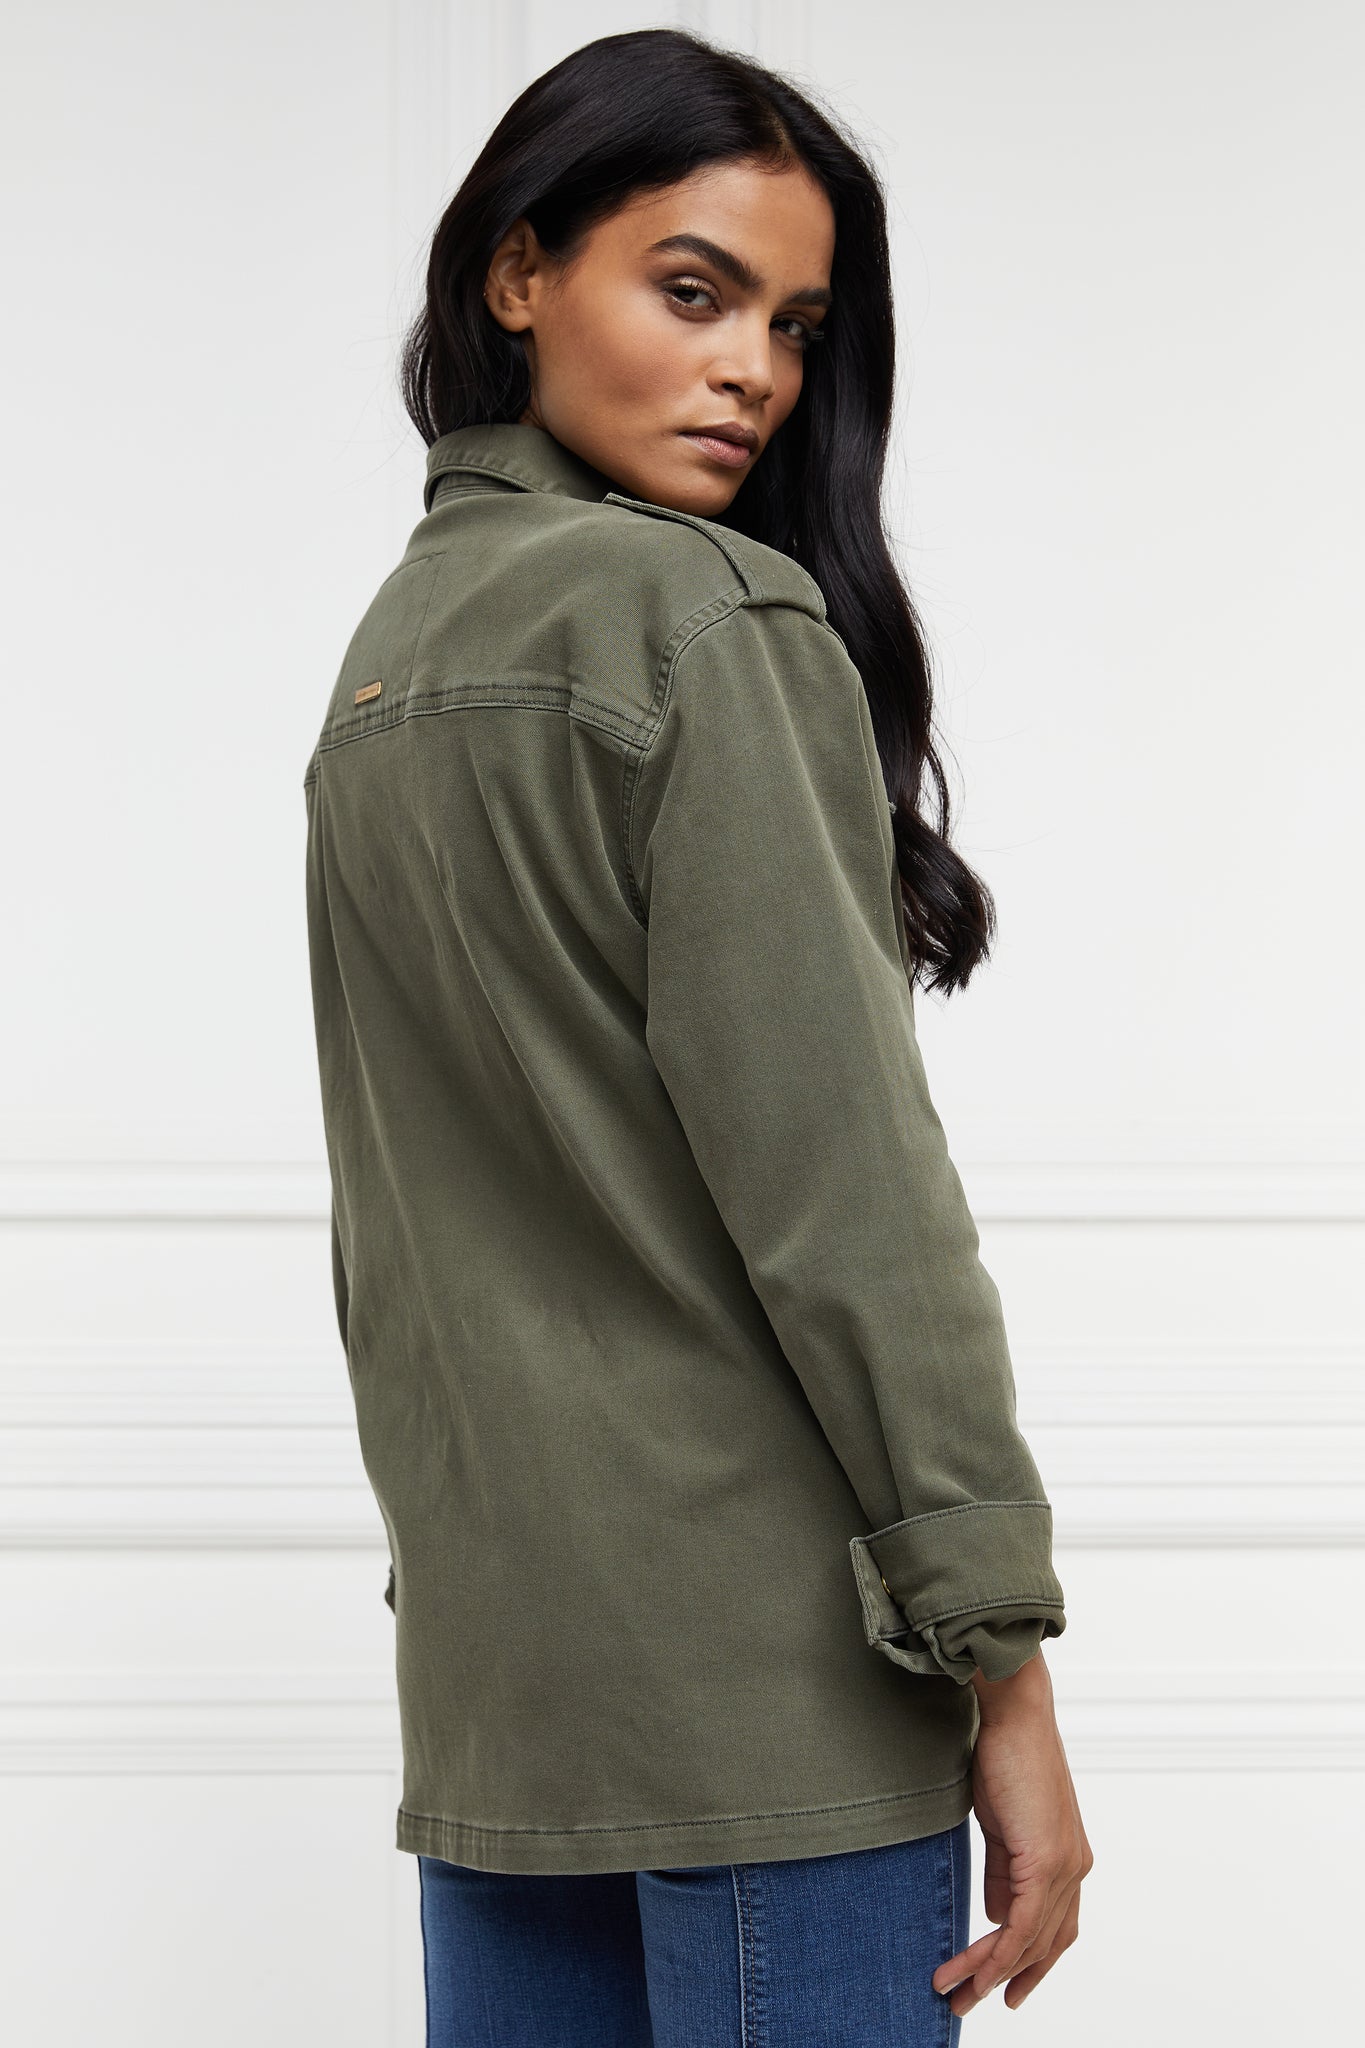 side of Relaxed fit collared artillery style jacket in khaki with four pockets two chest ones being box pleated  and two hip being patch pockets with gold jean button fastenings adjustable long sleeves and epaulette shoulder detail